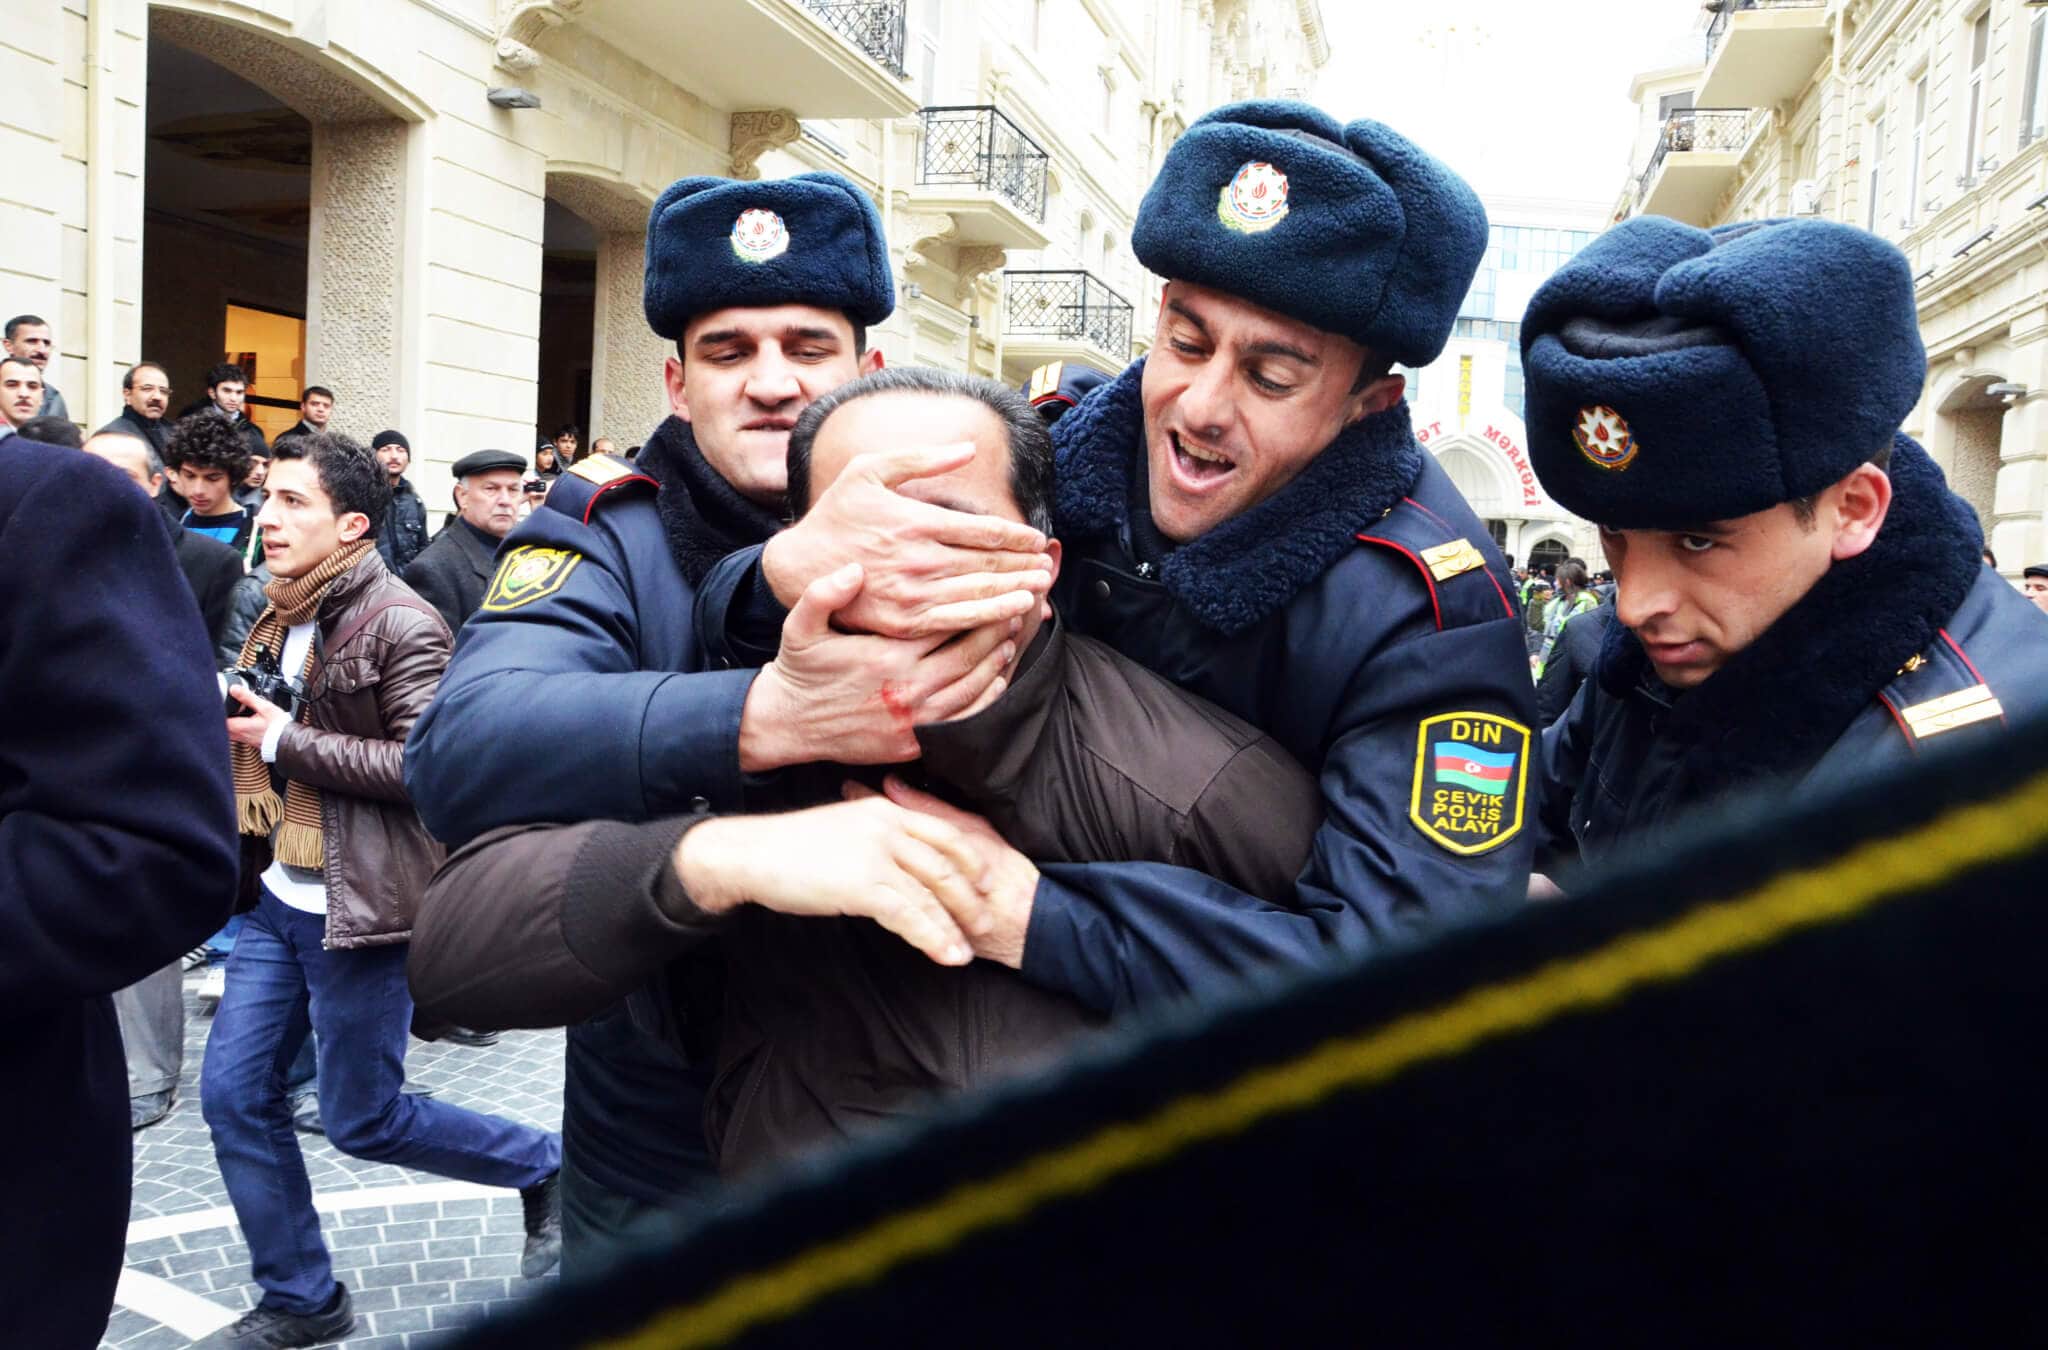 Azerbaijan: Council of Europe must speak up against crackdown on human rights defenders - Protection